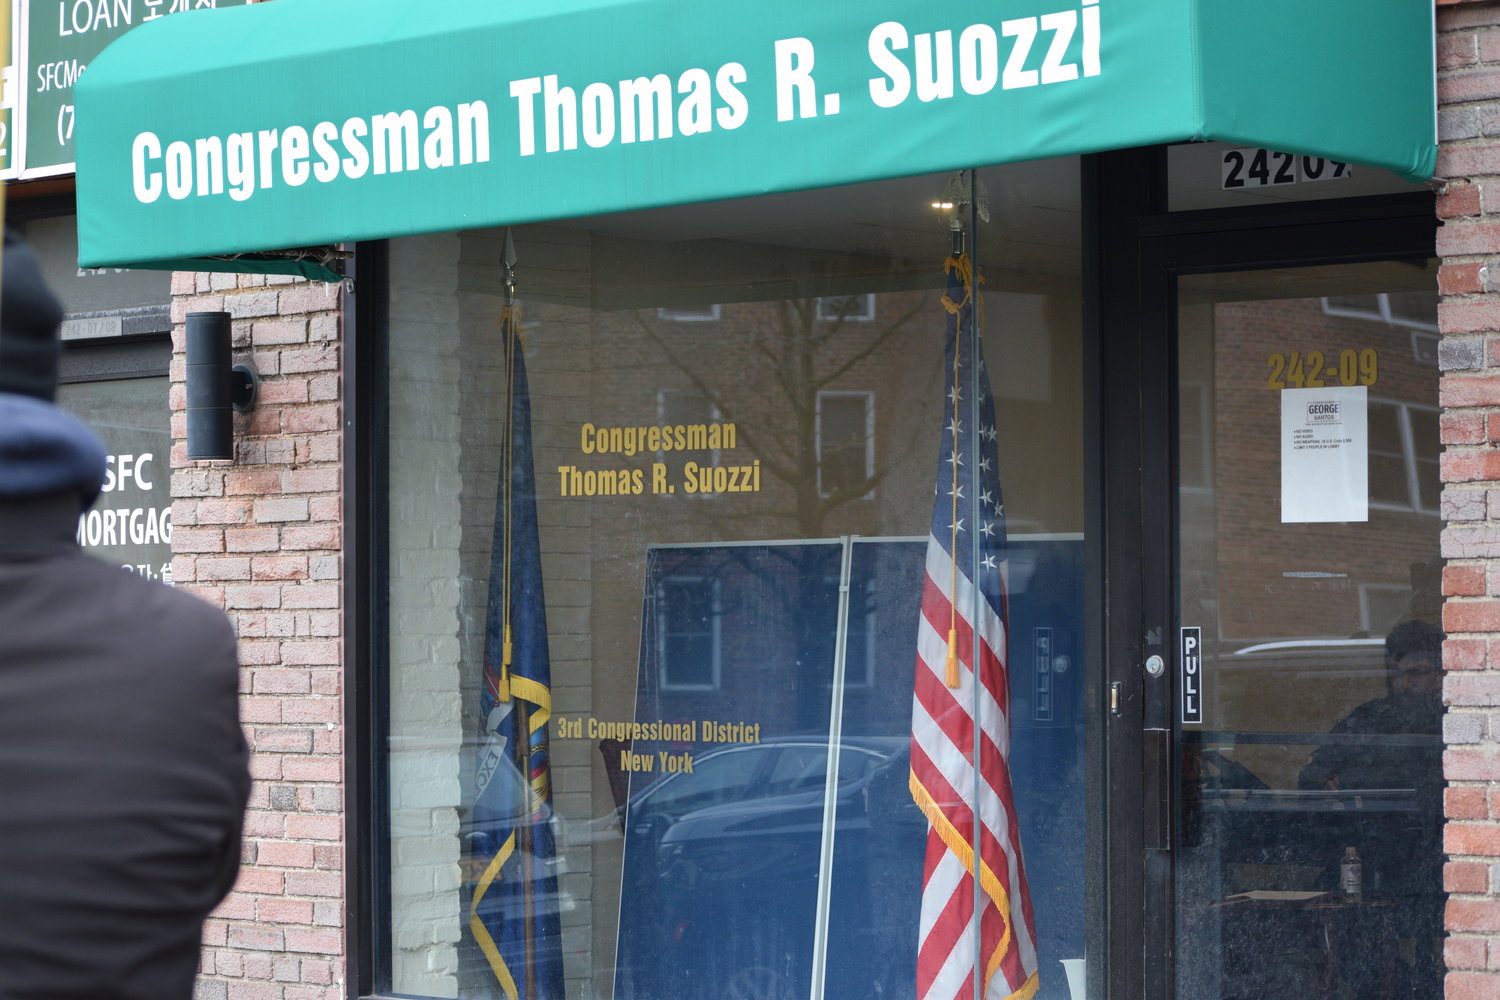 U.S. Rep. George Santos has taken over office space in the Queens neighborhood of Douglaston, but the location still bears the name of his predecessor, Tom Suozzi.